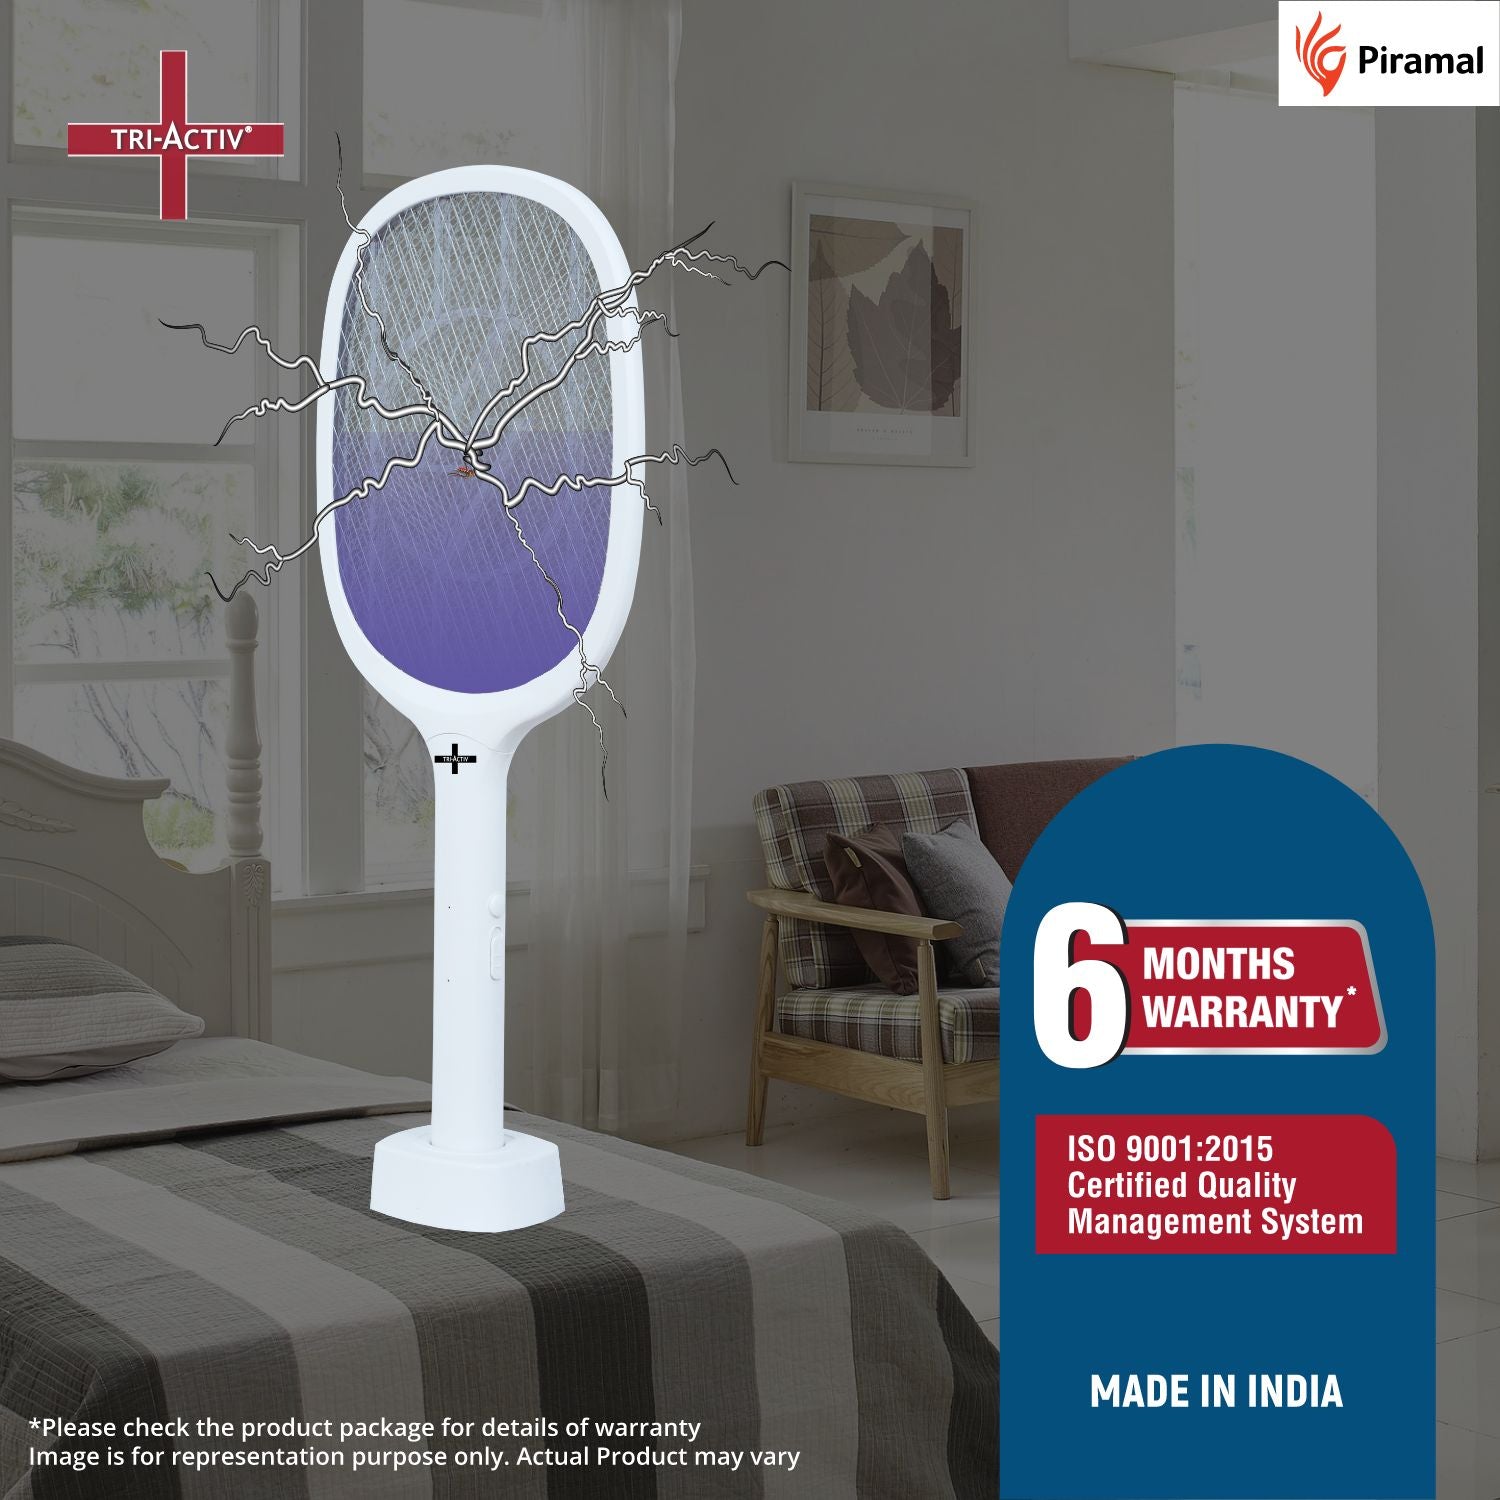 Tri-Activ Mosquito Racket 2-in-1 Dual Mode Rechargeable Bat,Zapper with Stand by Piramal I UV Light I Insect Killer & Fly Swatter I 1200 mAh Li-ion Battery,ISO Certified, 6 Month Warranty